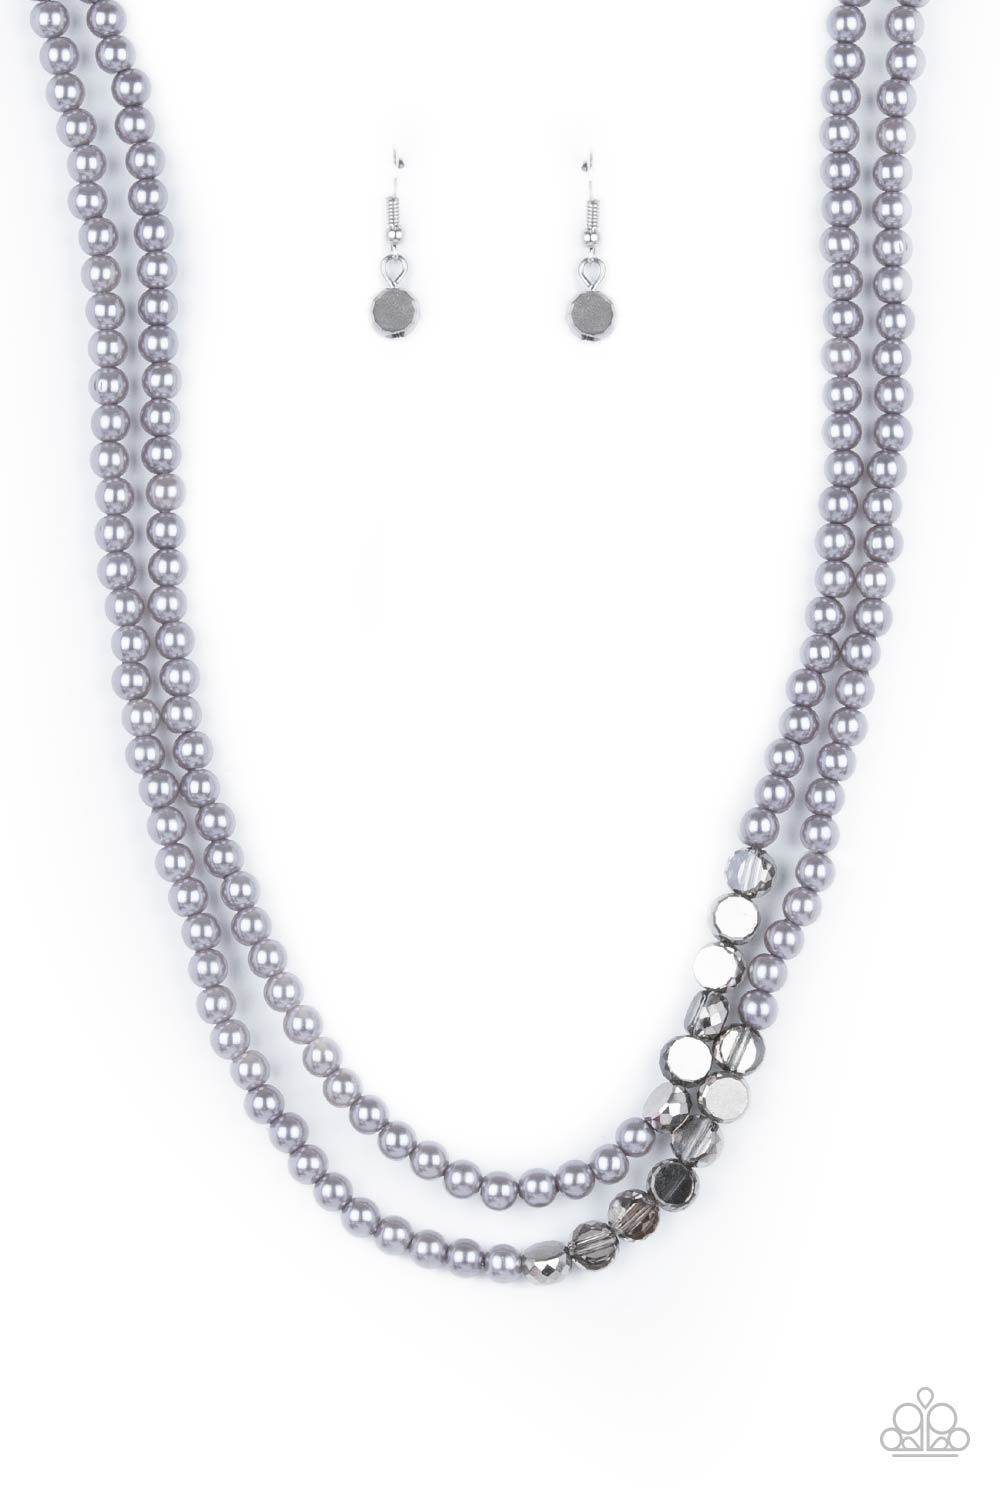 Poshly Petite Silver Necklace - Paparazzi Accessories.  A posh collection of pearly gray beads, accented by sections of flat, faceted metallic beads, is threaded along invisible wires, creating sophisticated layers that fall below the collar. Features an adjustable clasp closure.  ﻿All Paparazzi Accessories are lead free and nickel free!  Sold as one individual necklace. Includes one pair of matching earrings.